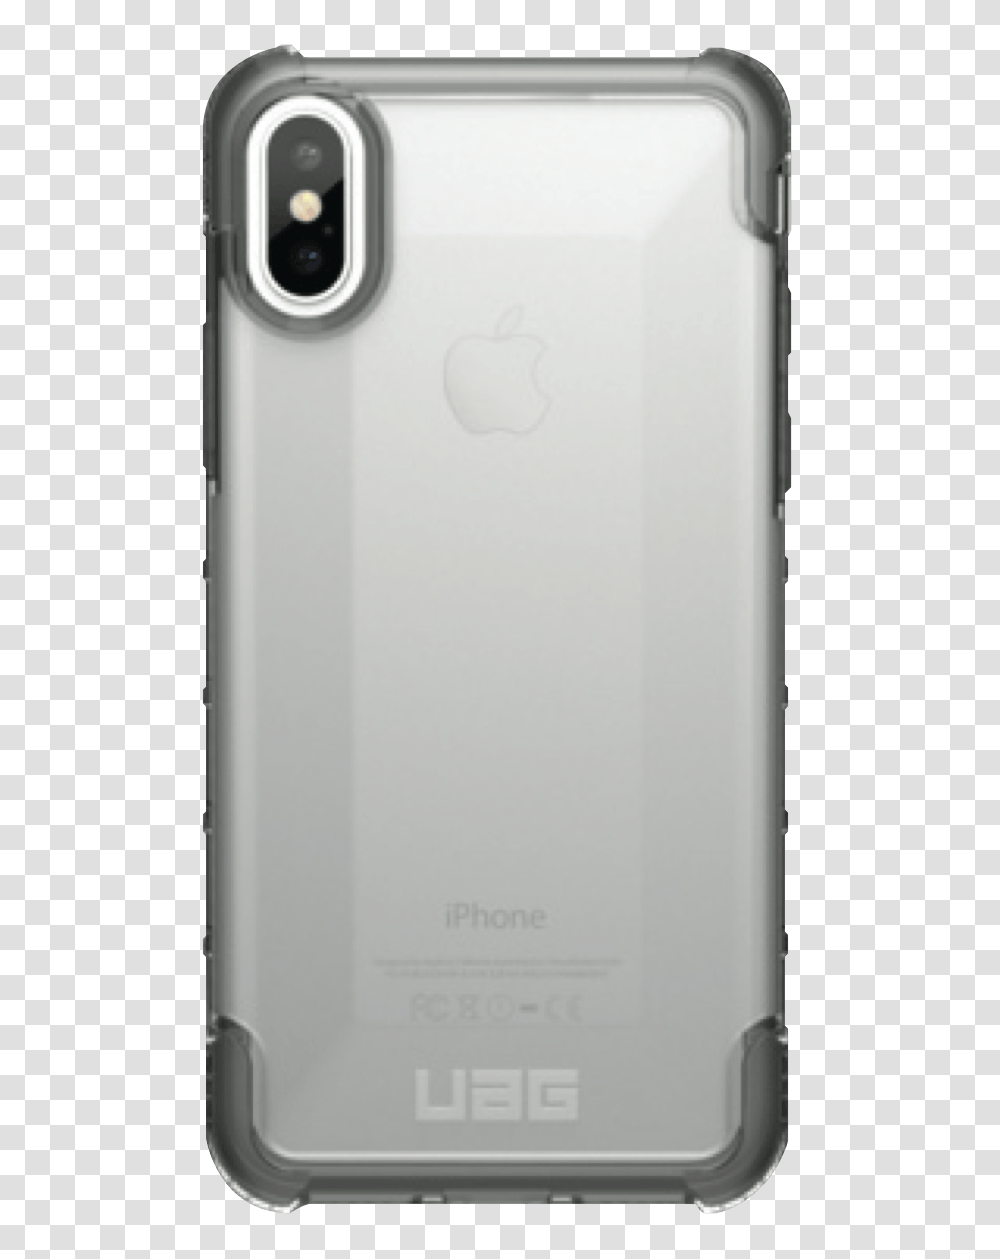 Uag U Iph8 Y Ic Iphone Iphone 8 Plyo Case, Electronics, Mobile Phone, Cell Phone, Ipod Transparent Png